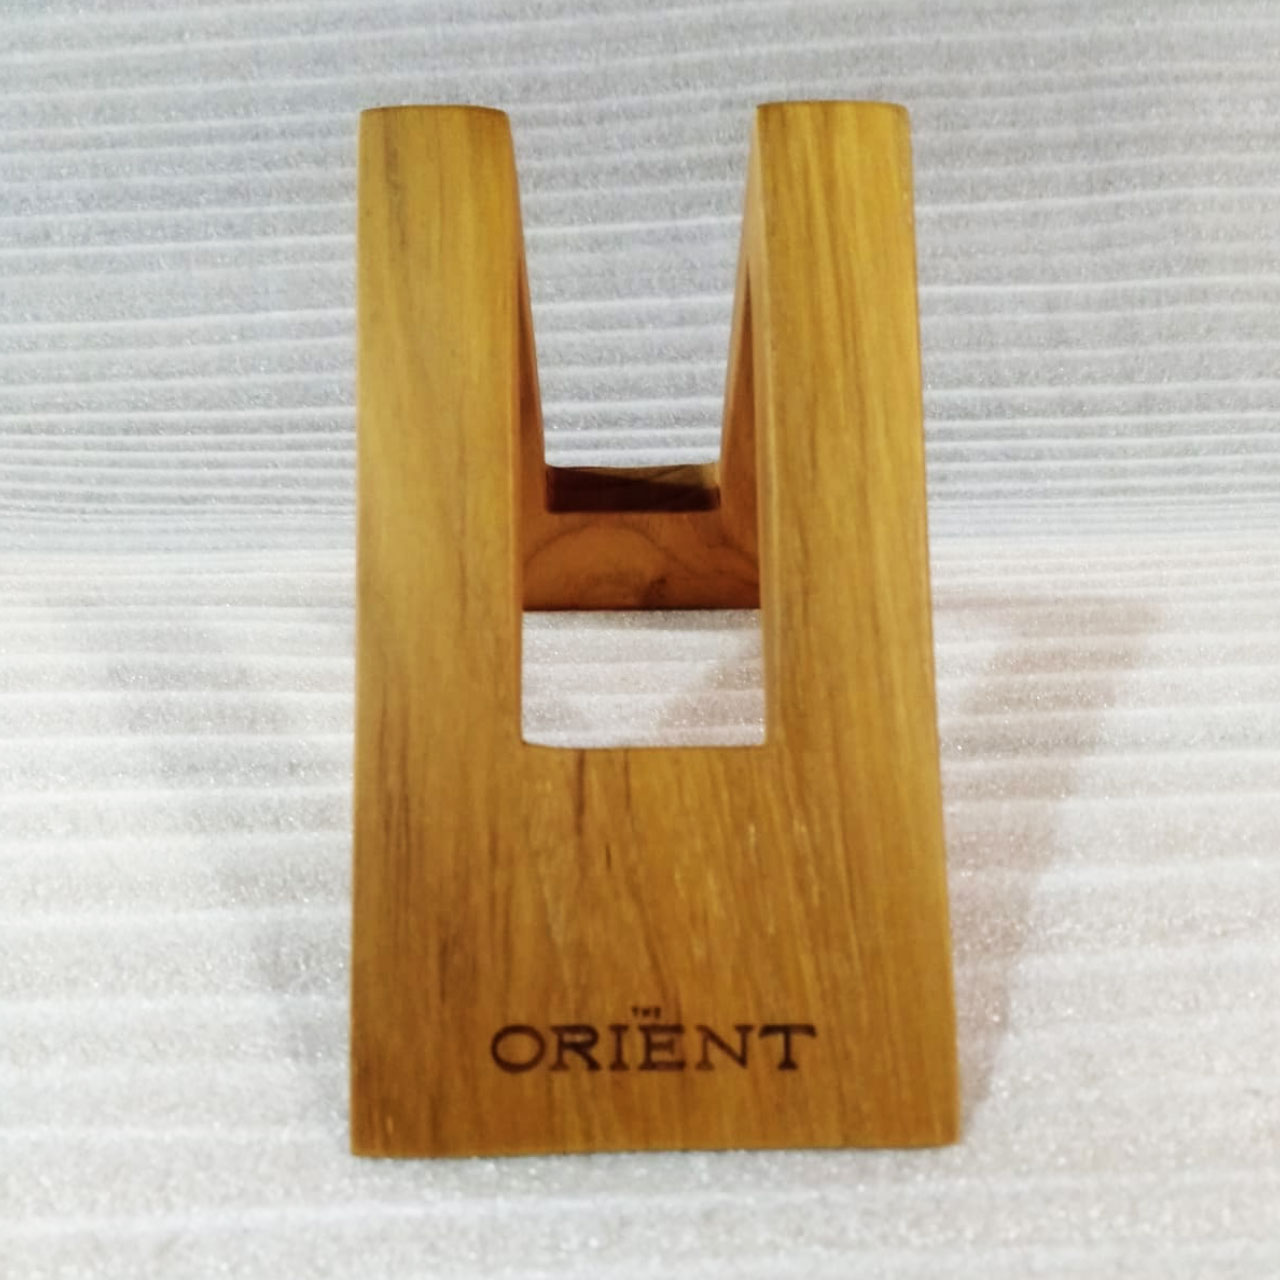 Project Orient Hotel